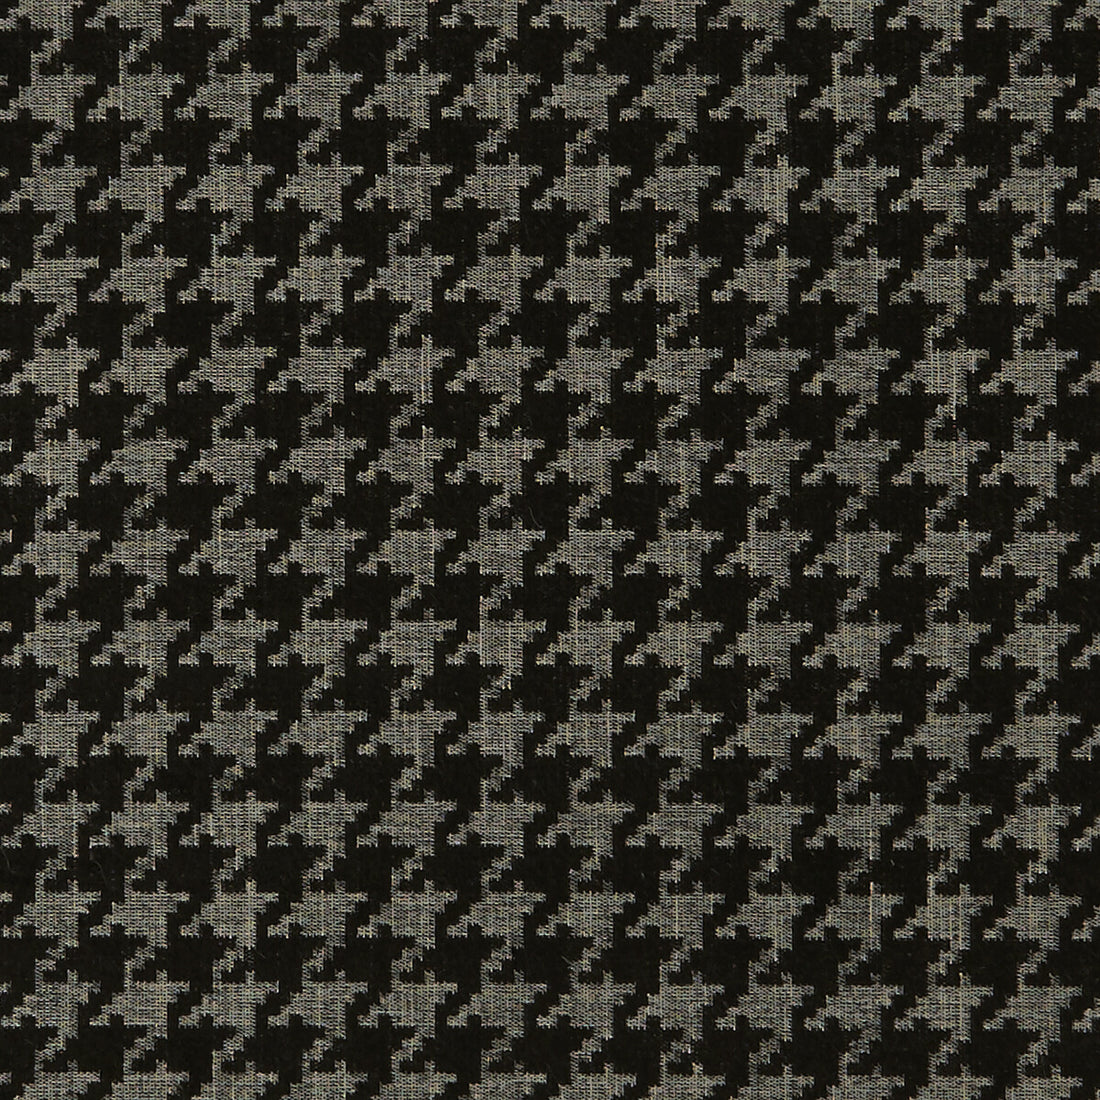 Bw1027 fabric in black/white color - pattern F0900/01.CAC.0 - by Clarke And Clarke in the Clarke &amp; Clarke Black + White collection